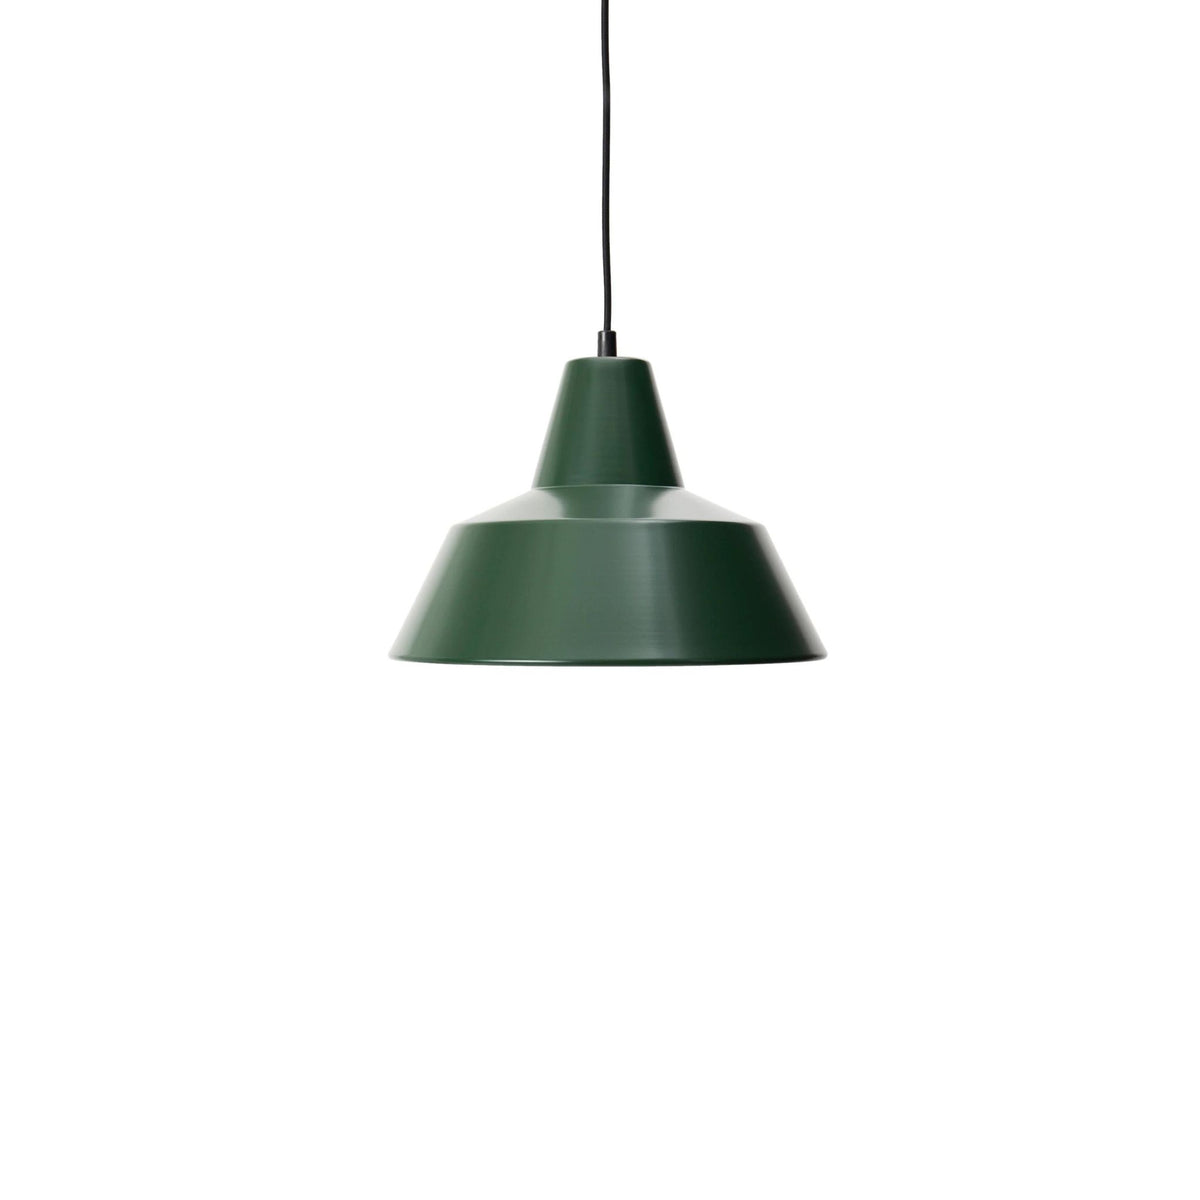 Made by Hand Workshop W3 Pendant in Racing Green by A Wedel Madsen